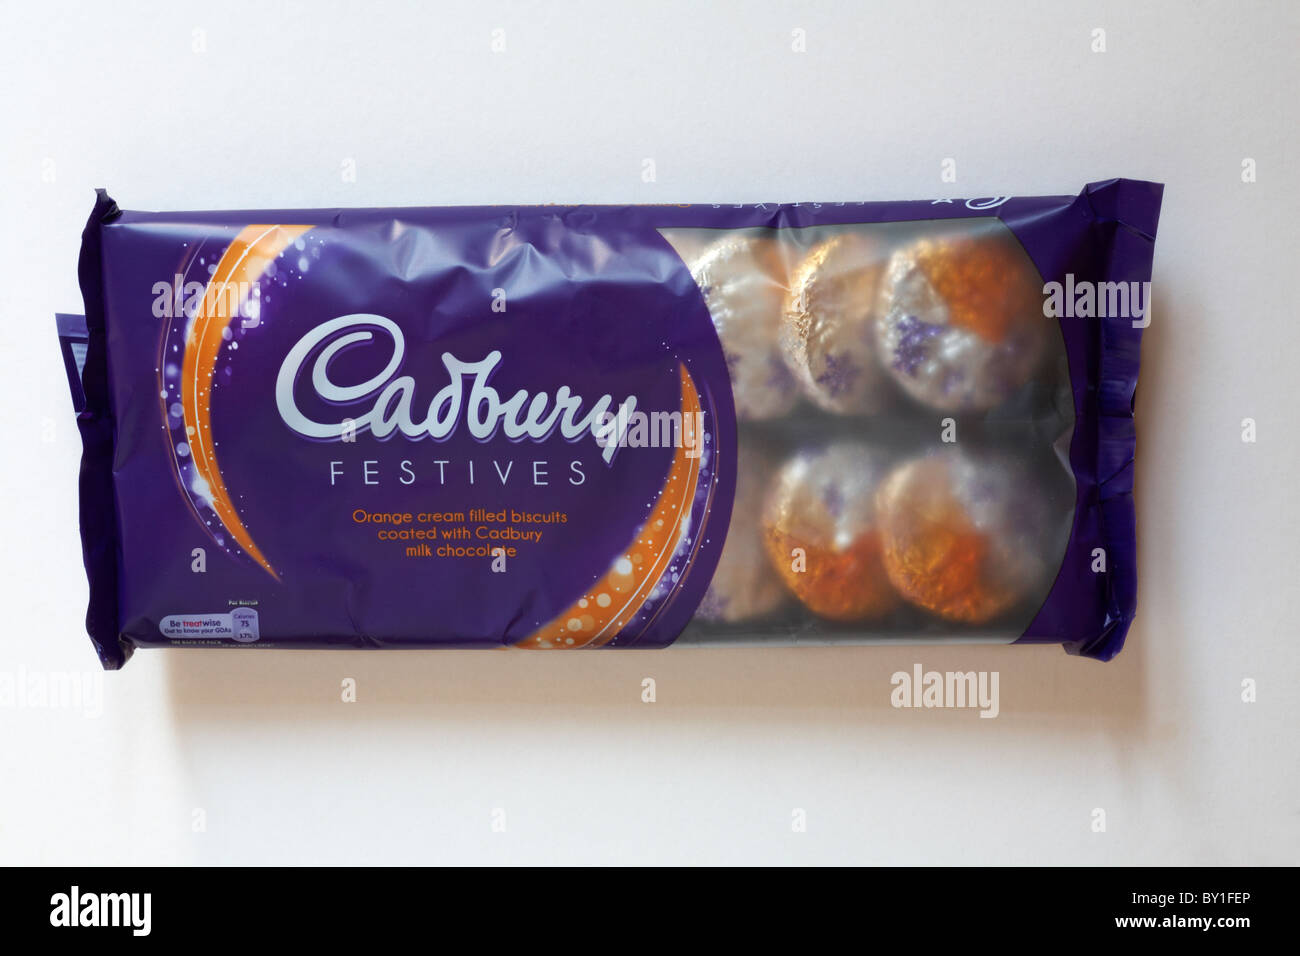 Packet of Cadbury Festives orange flavour biscuits isolated on white background Stock Photo